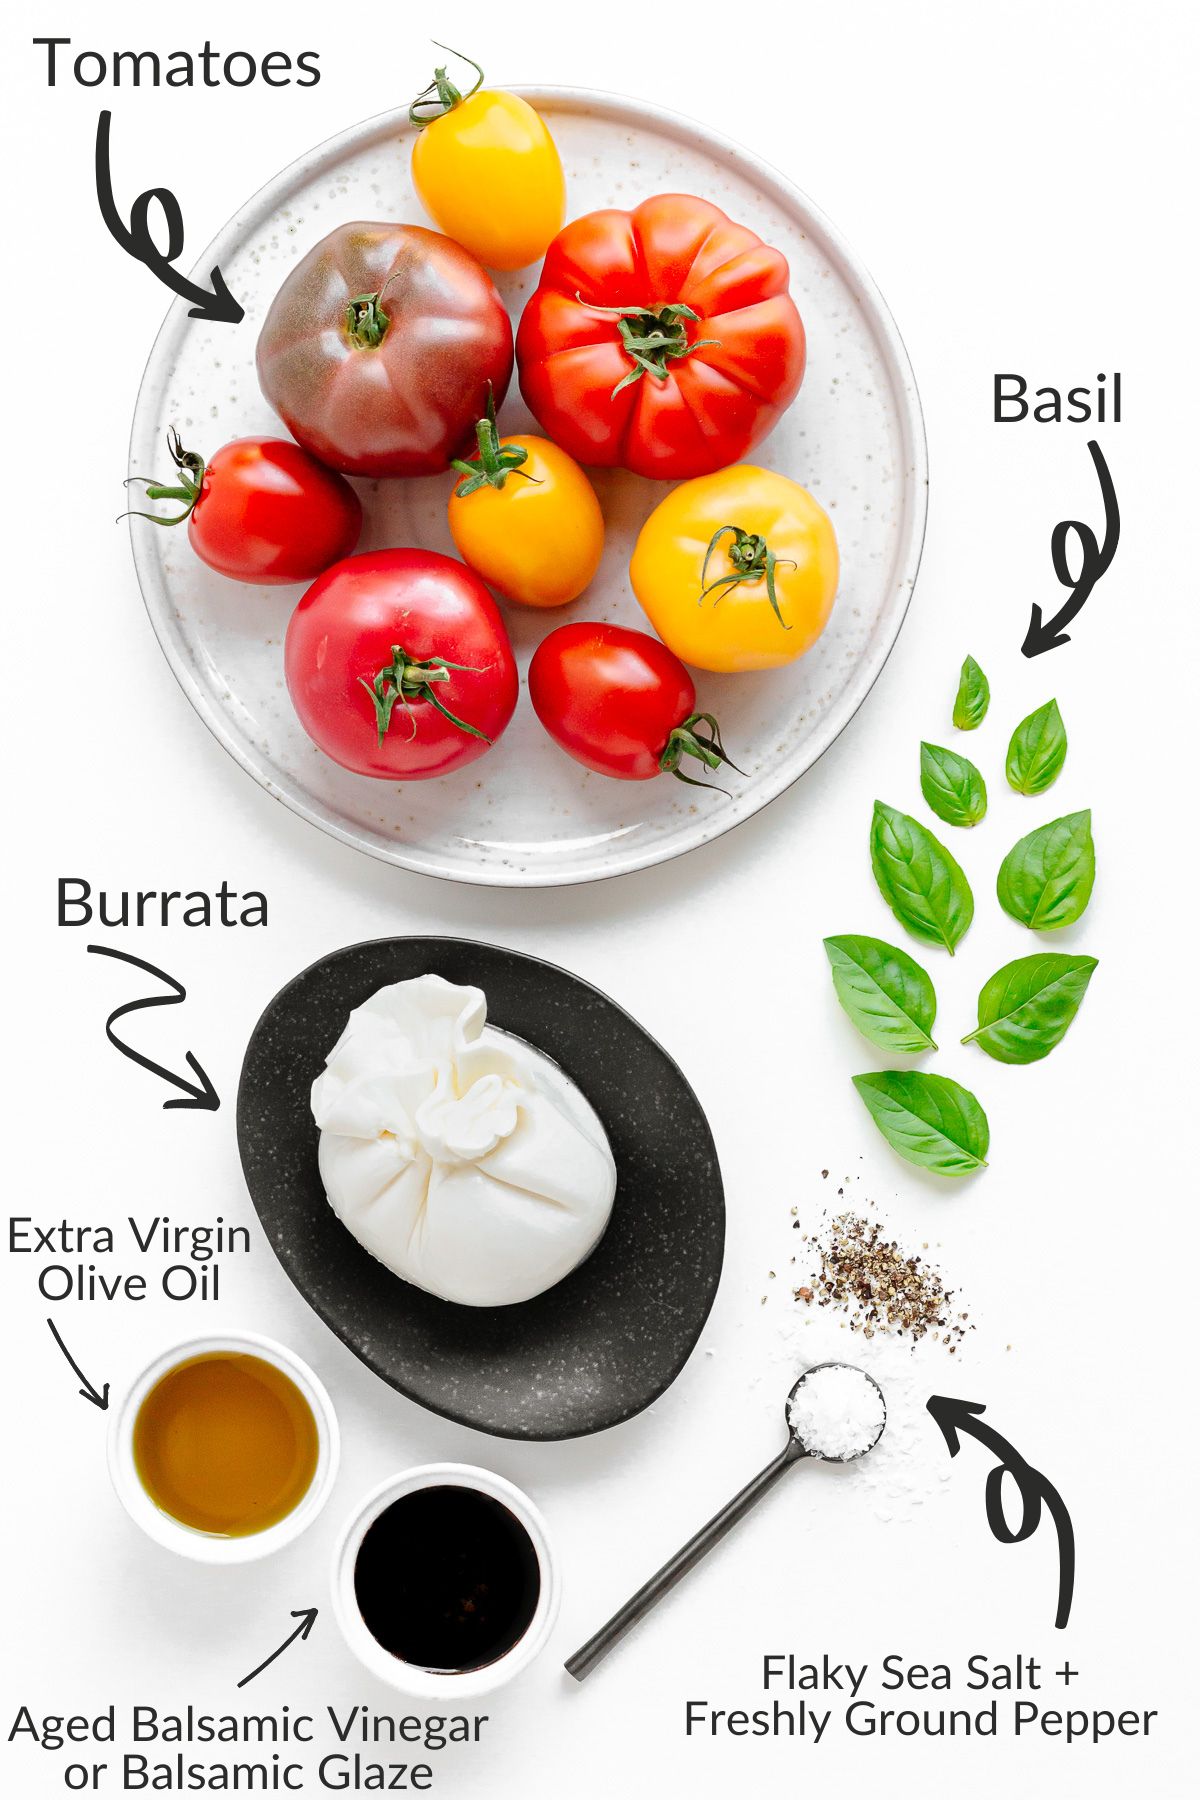 Labelled photo of ingredients needed to make a burrata caprese salad.